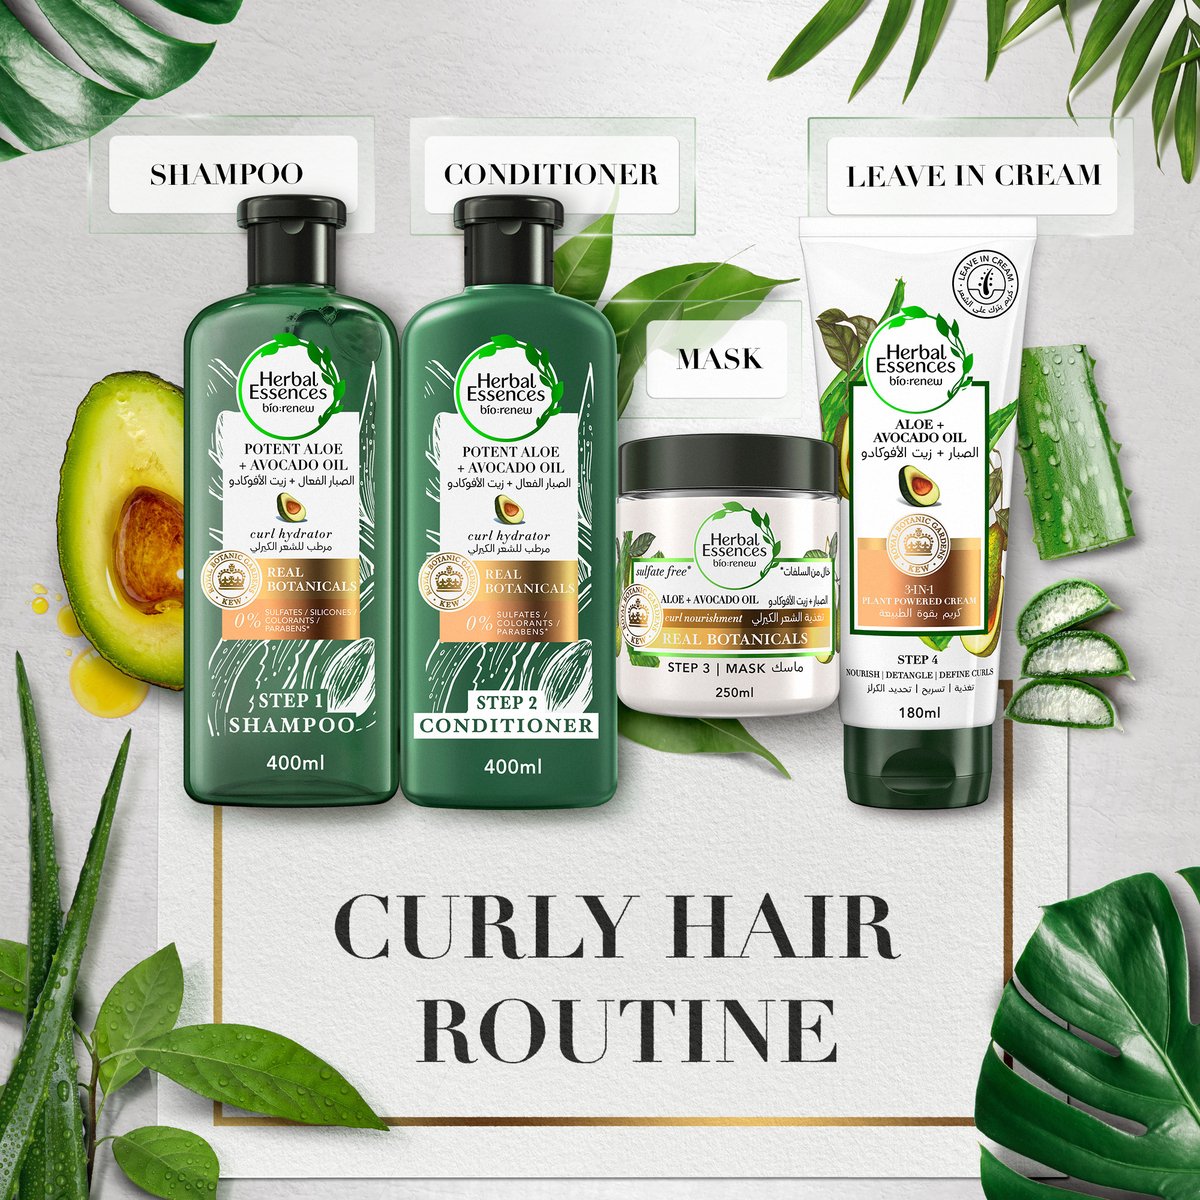 Herbal Essences Sulfate-Free Potent Aloe + Avocado Oil Hair Conditioner For Curl Hydration and Moisturizing, 400 ml